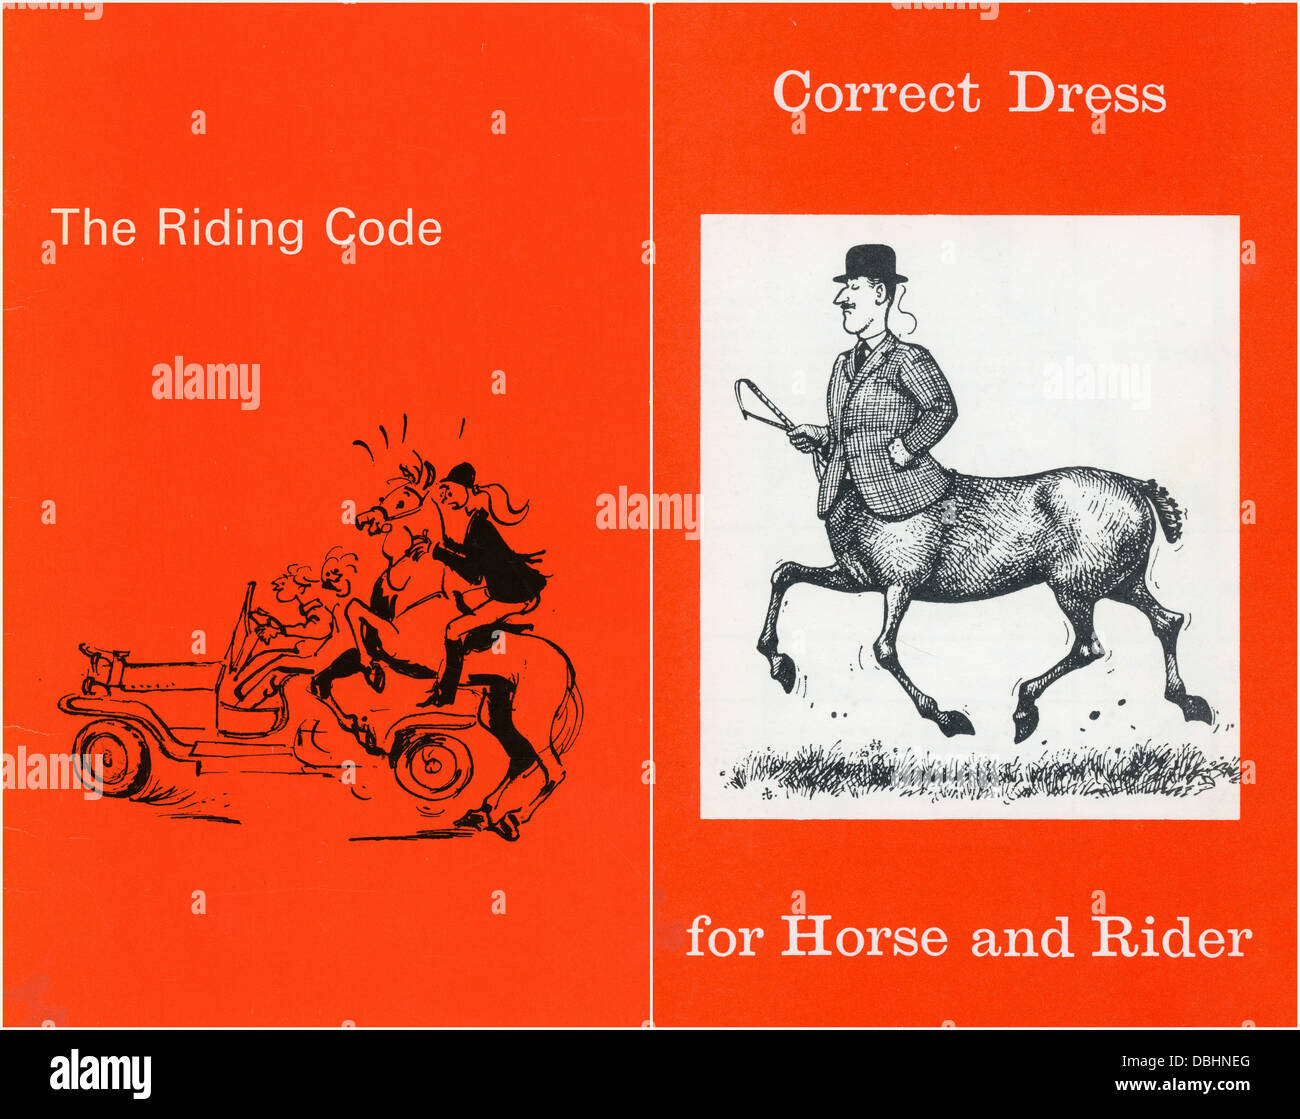 Correct Dress for Horse and Rider pamphlet by Moss Bros and The Riding Code with illustrations by Thelwell Stock Photo